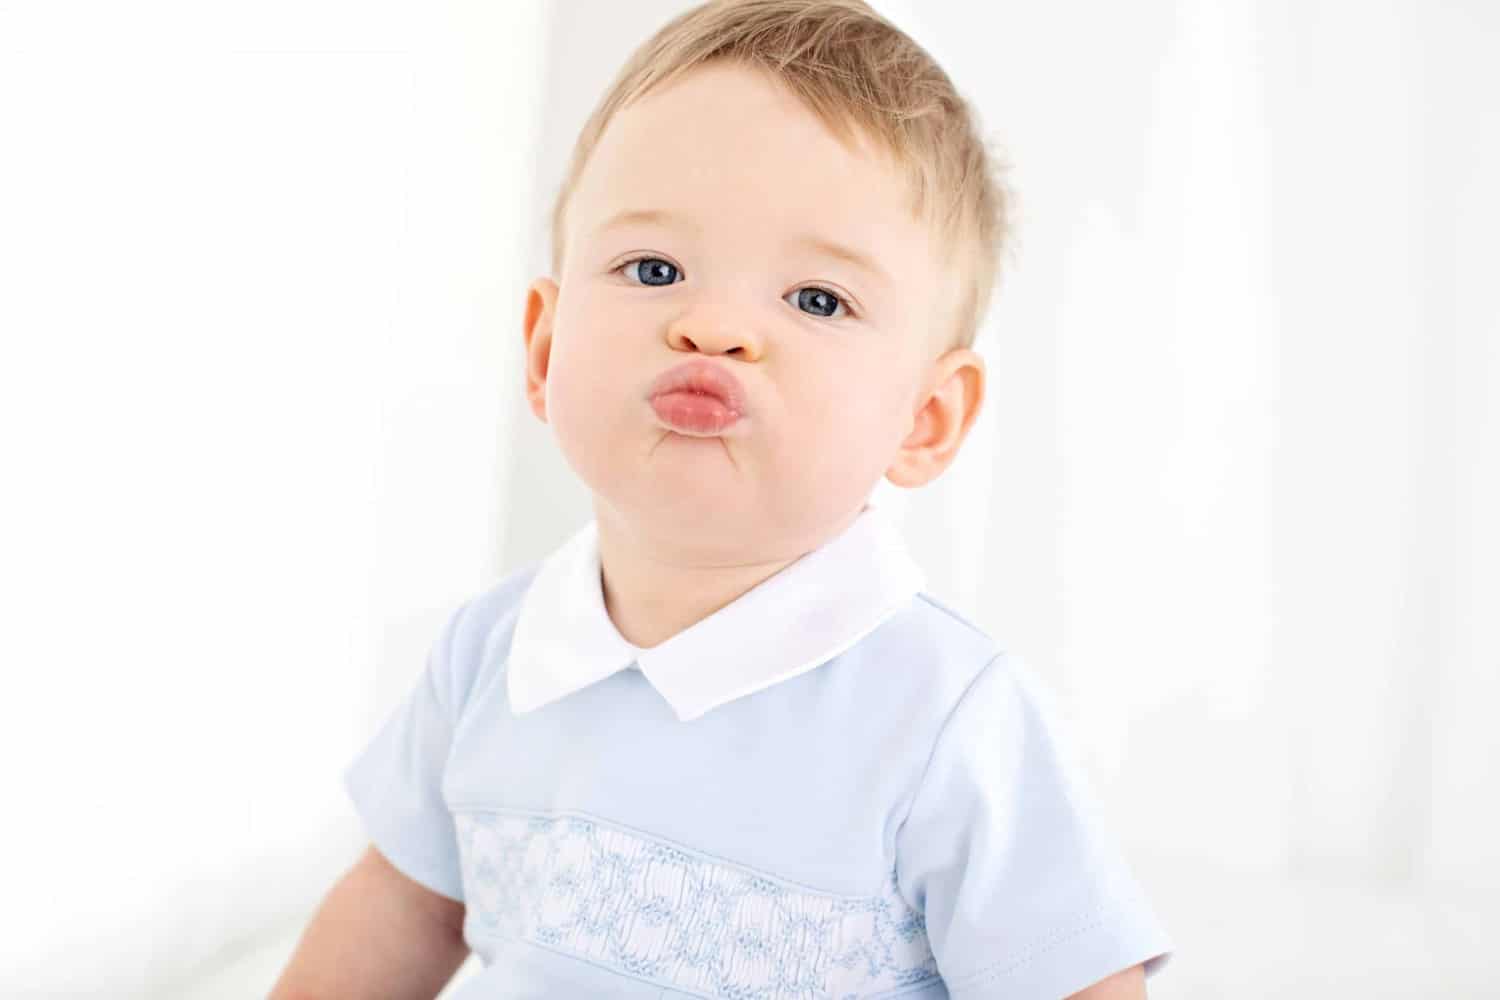 A boy blows a kiss to the camera.